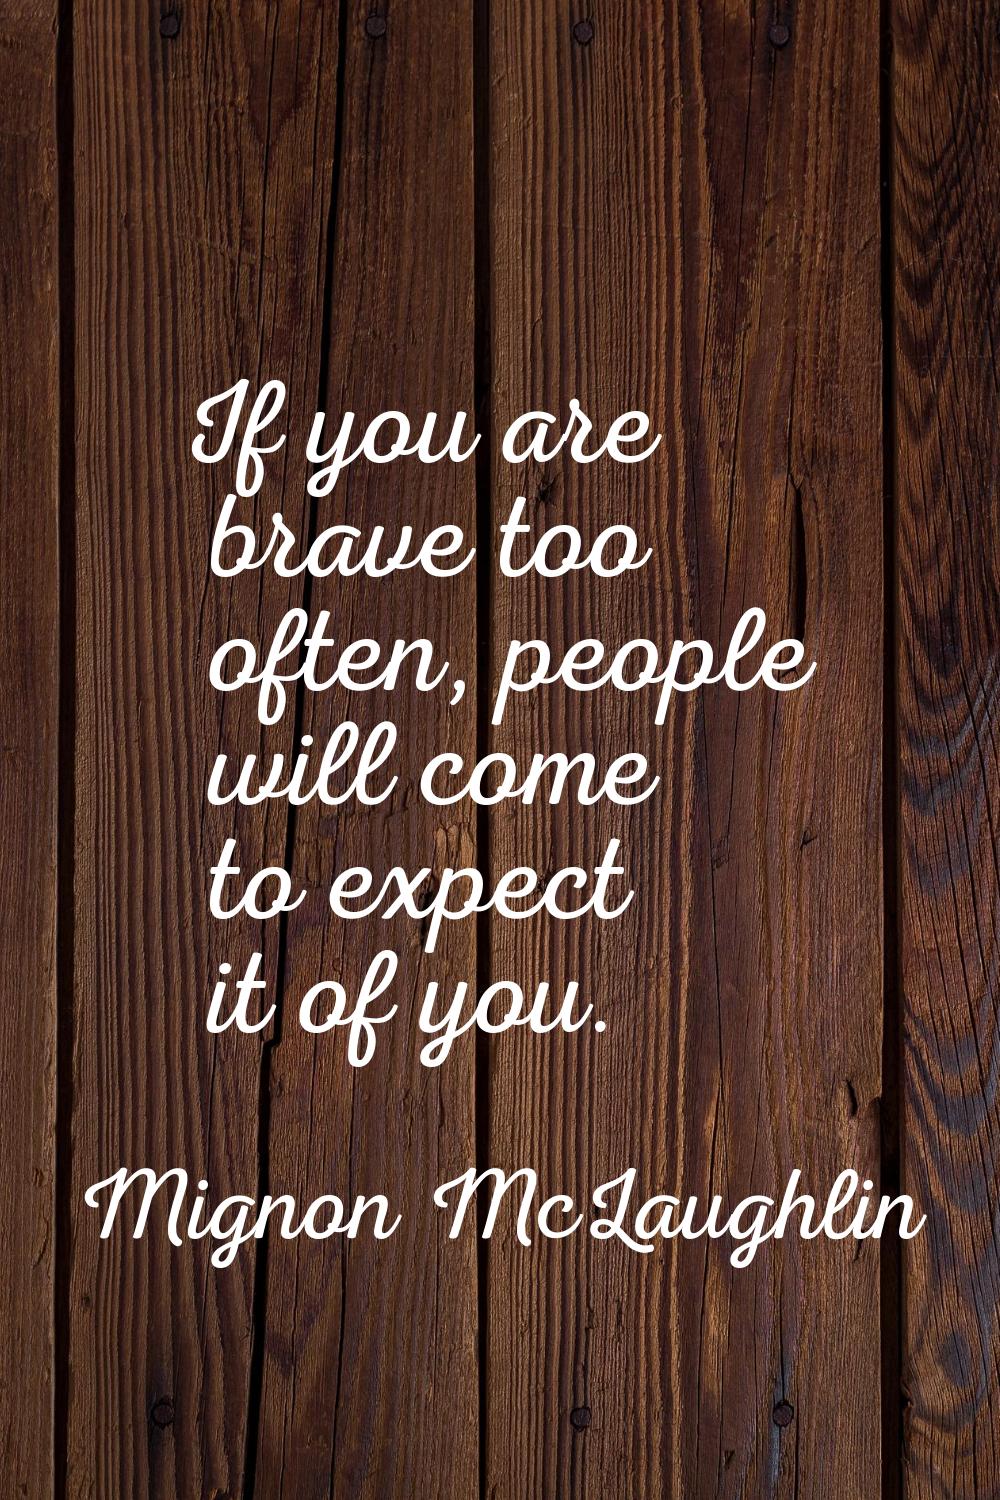 If you are brave too often, people will come to expect it of you.